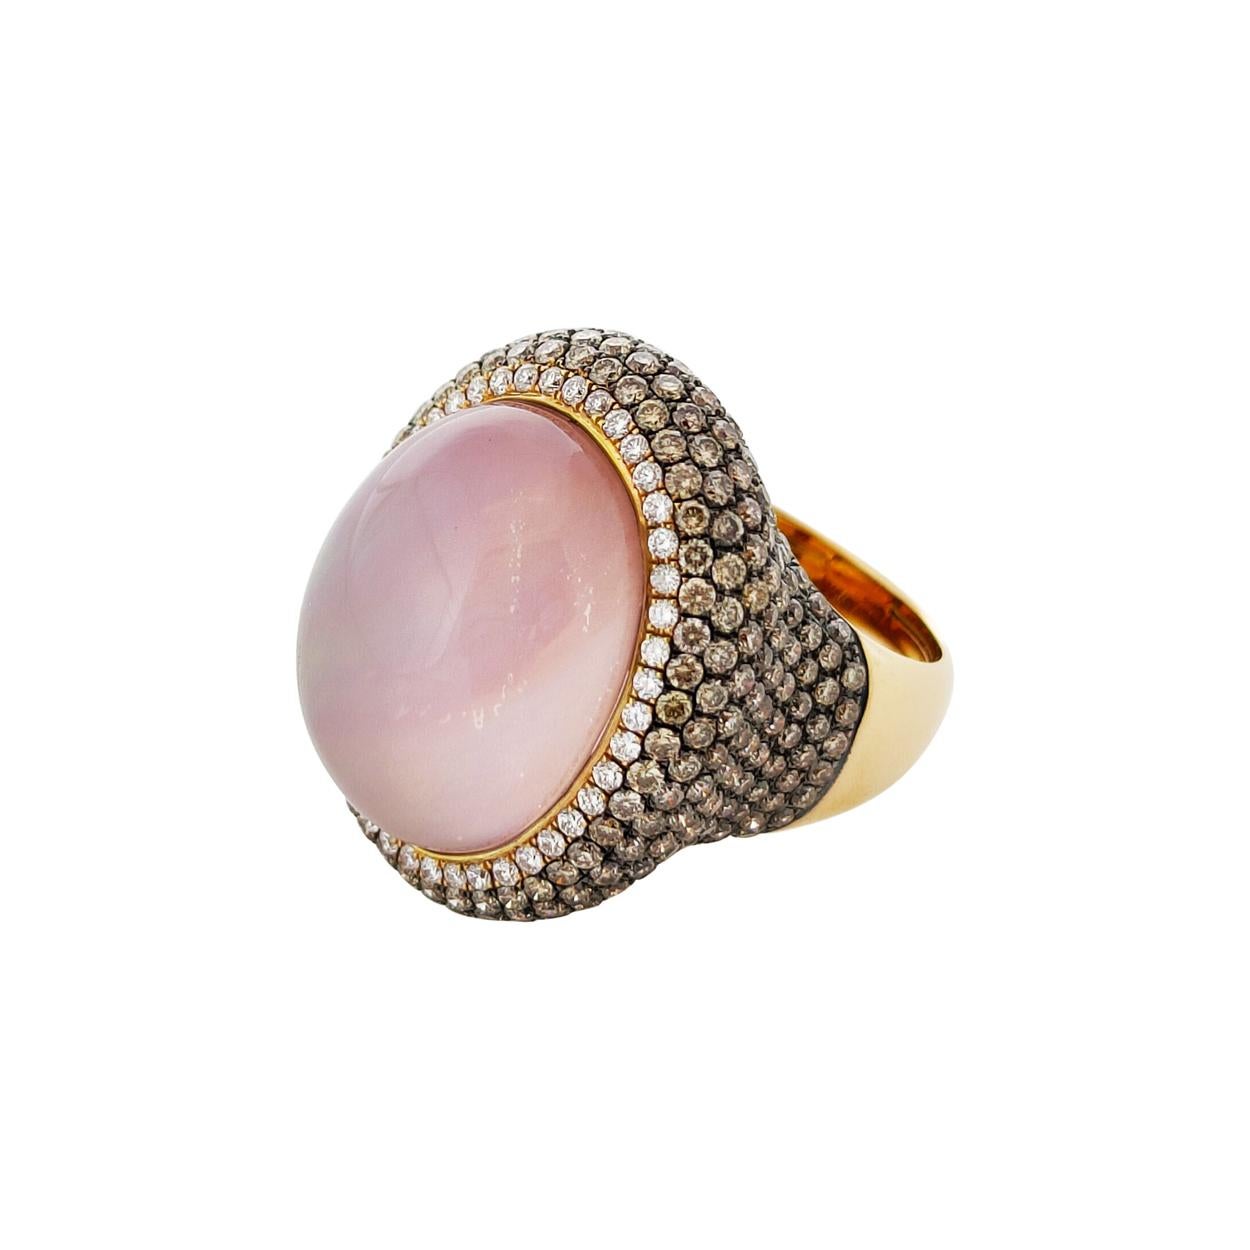 Bespoke One-of-a-Kind Cocktail Ring with Rose Quartz and Diamonds